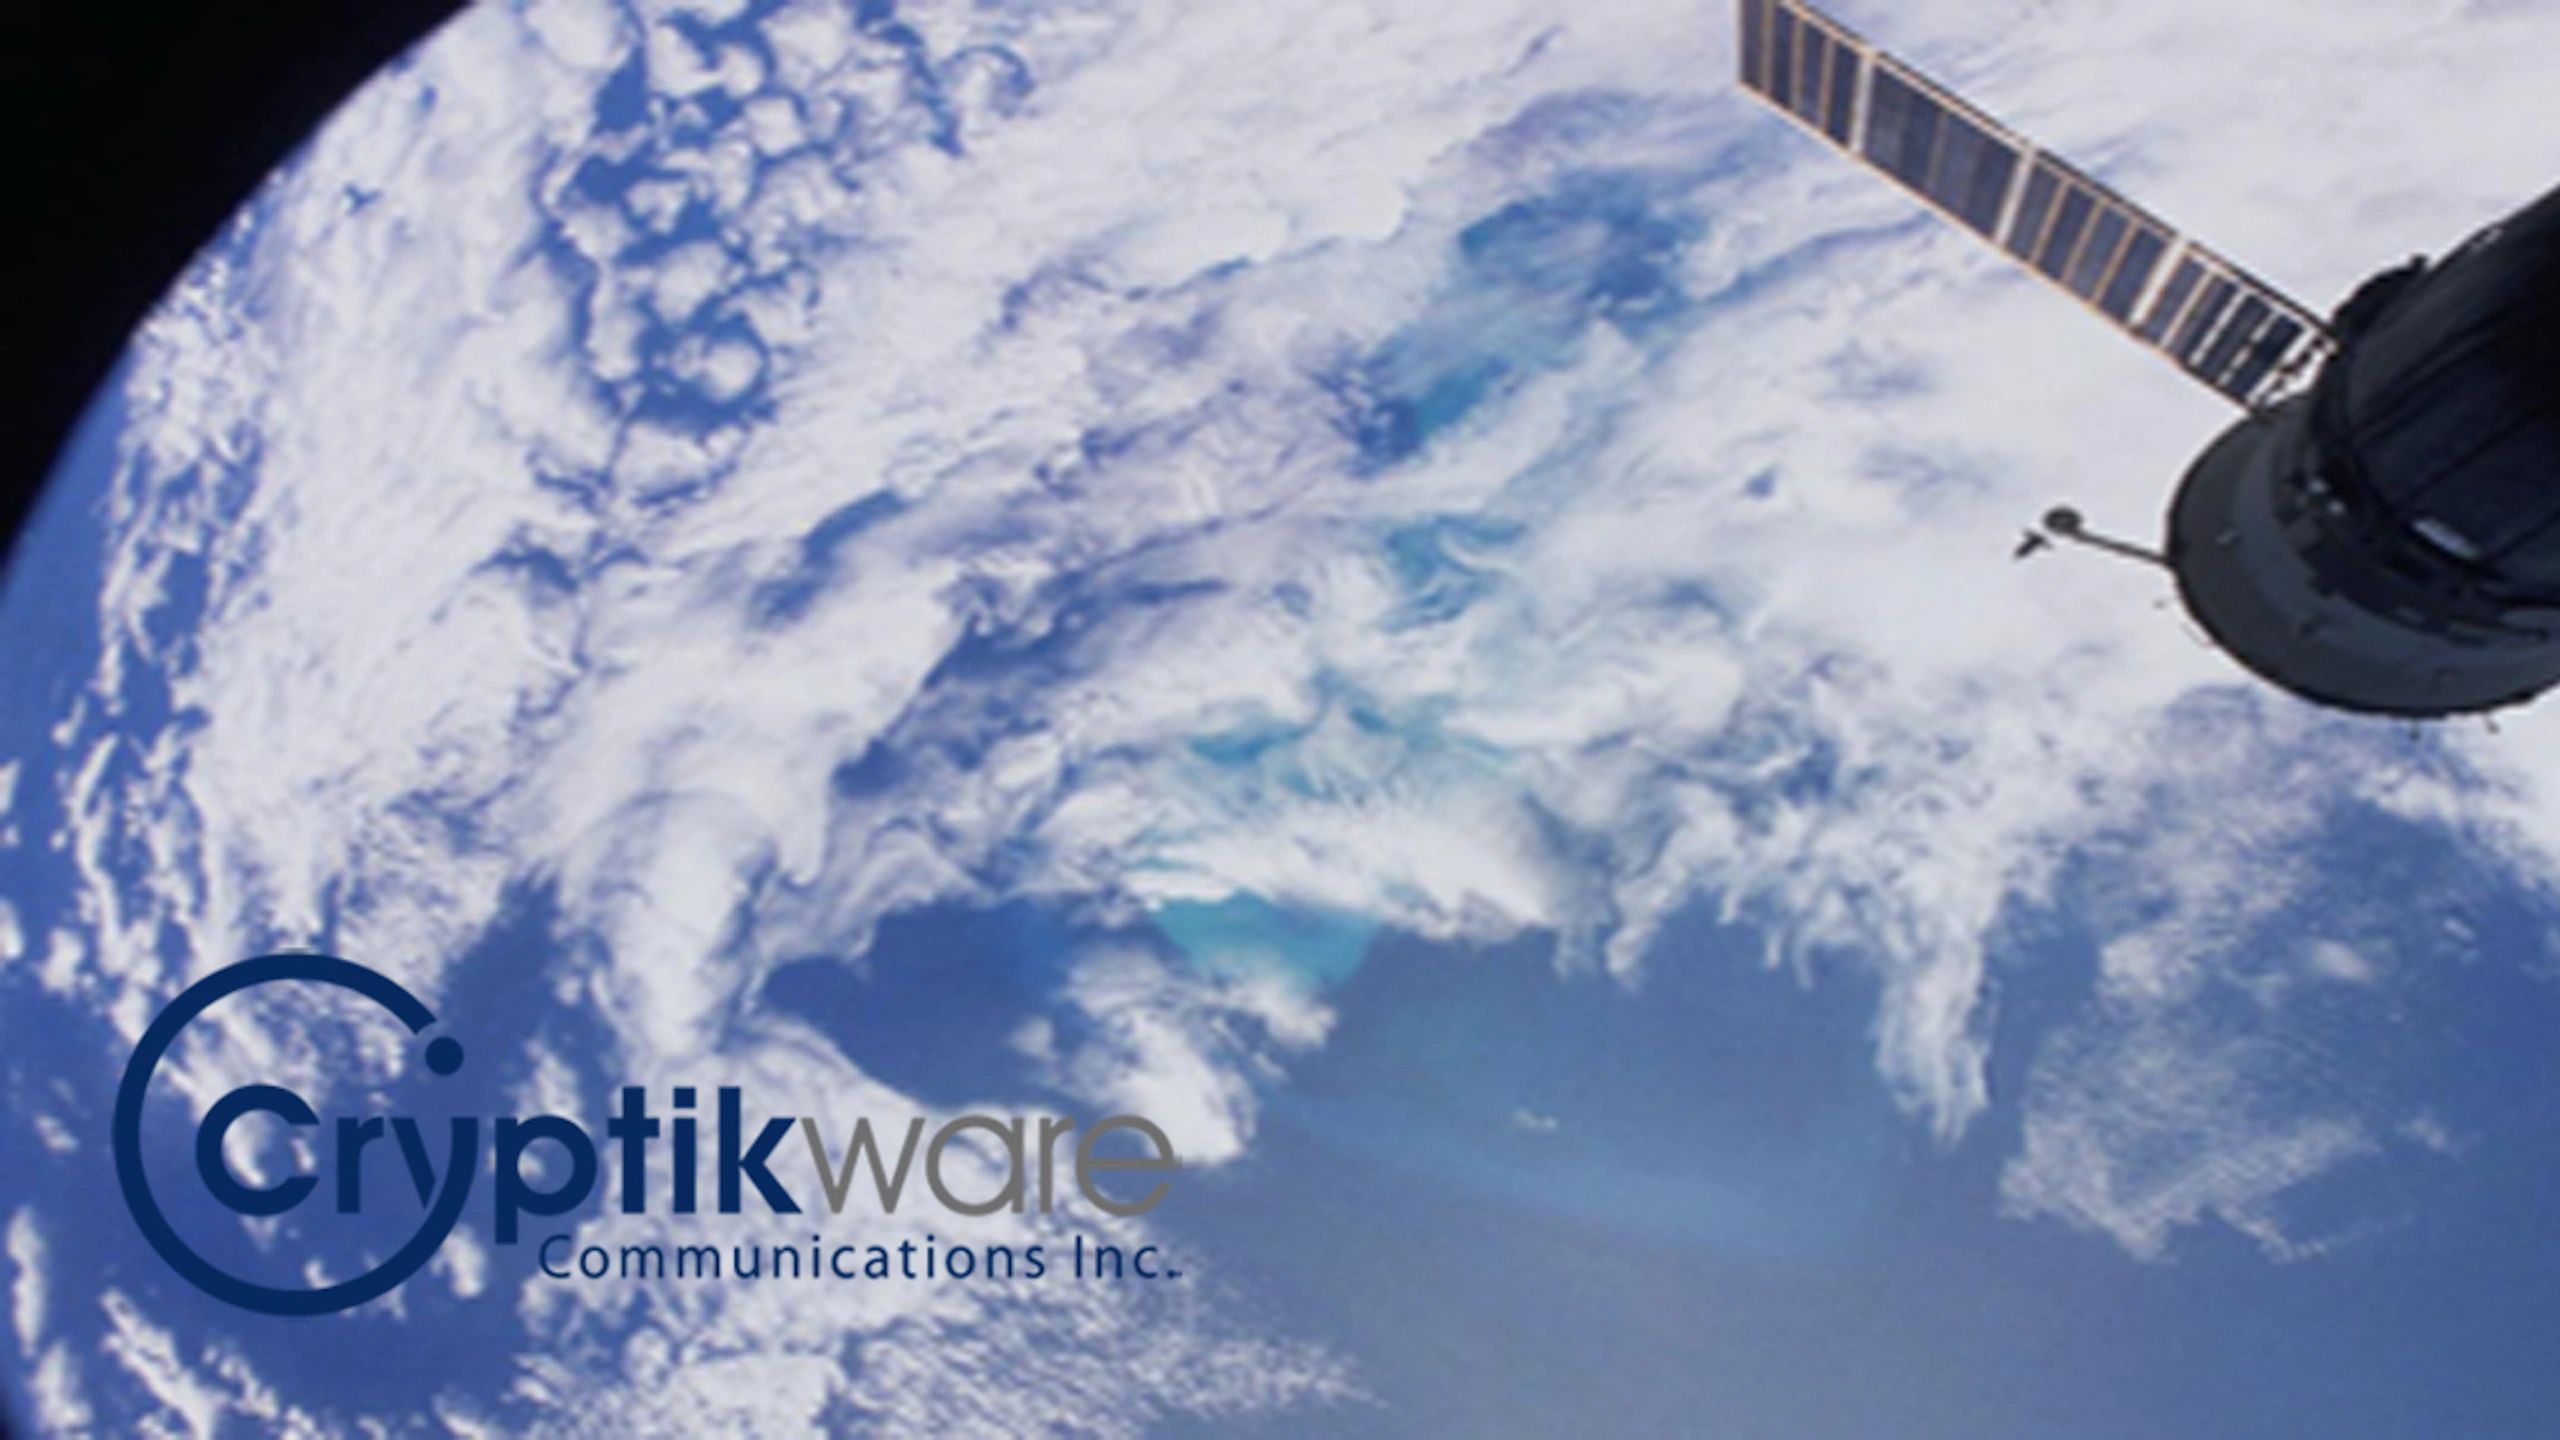 Cryptikware Communications Inc